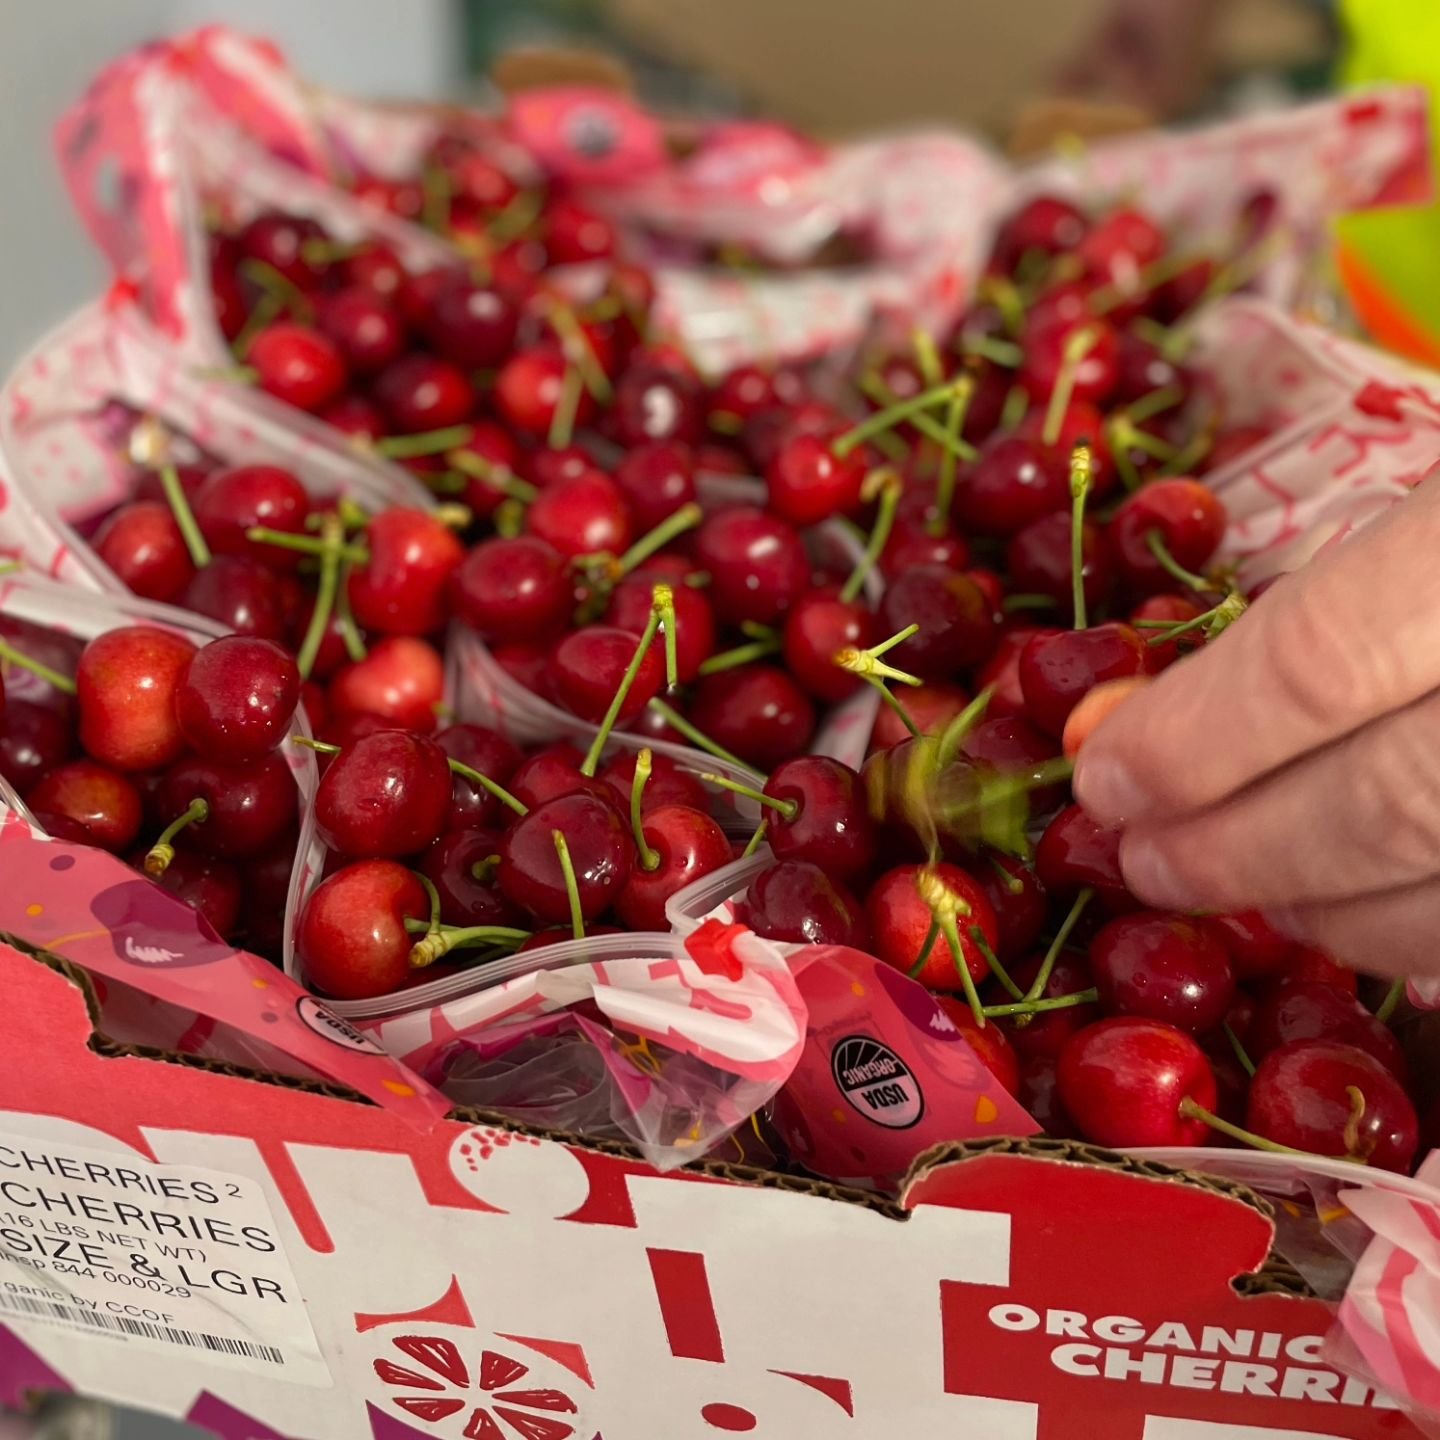 California Stone Fruit season kicks off with sublime Tioga Cherries from Fruit World. Tioga cherries have consistently been some of the first harvested in California. Tiogas have glossy firm dark flesh and a very sweet flavor that is similar to Bings